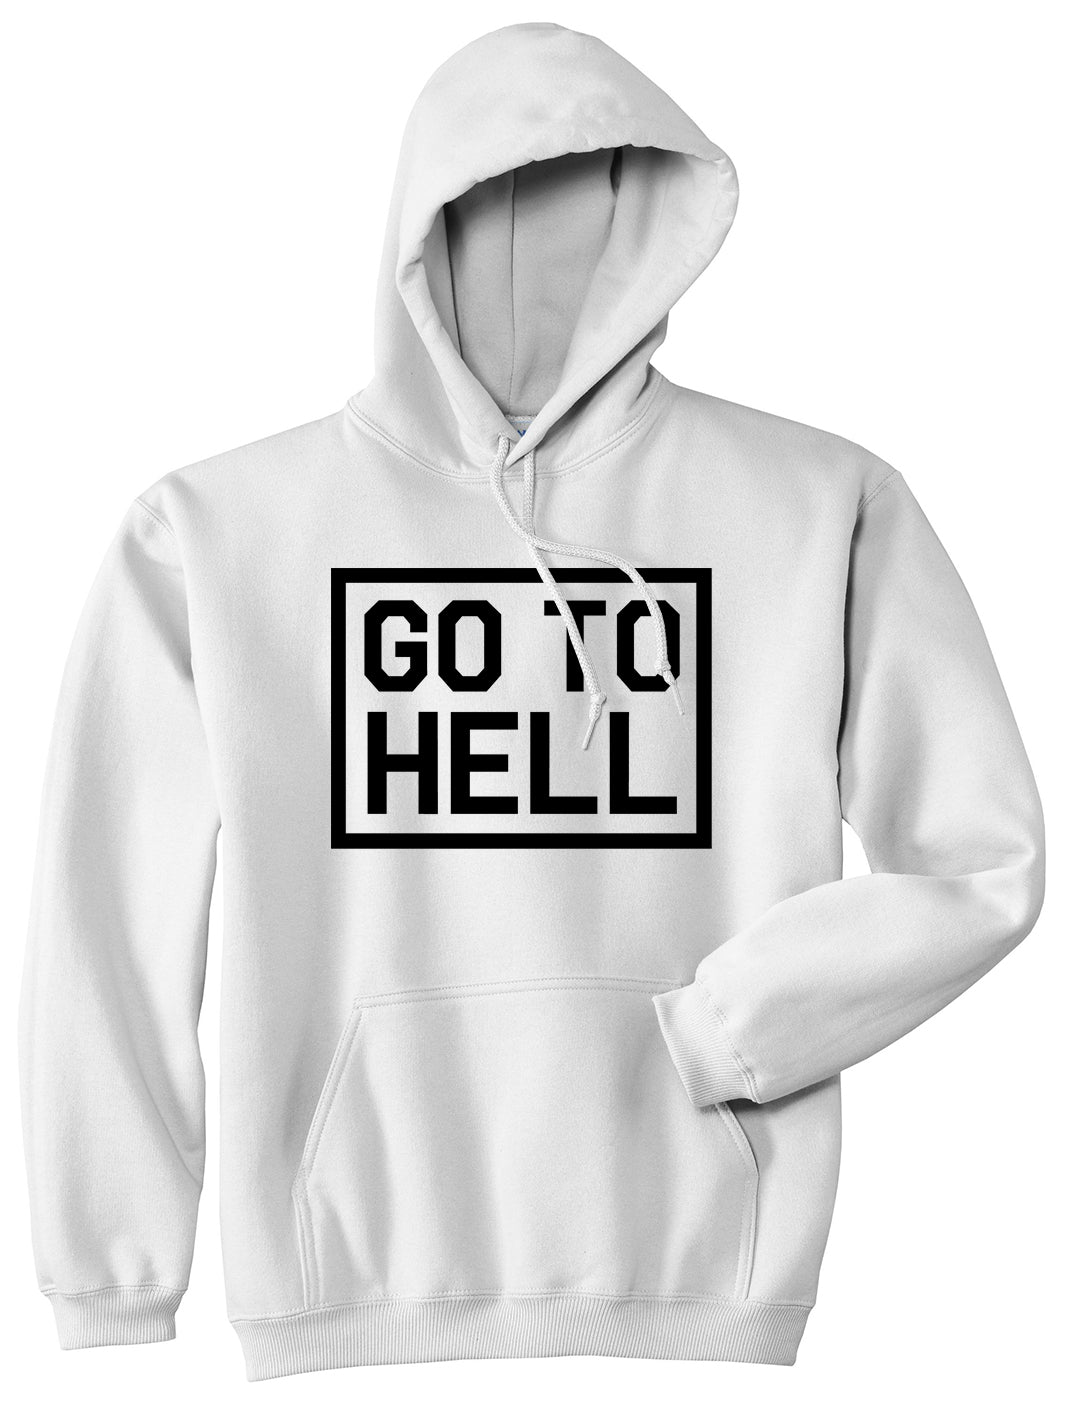 Go To Hell Mens White Pullover Hoodie by KINGS OF NY